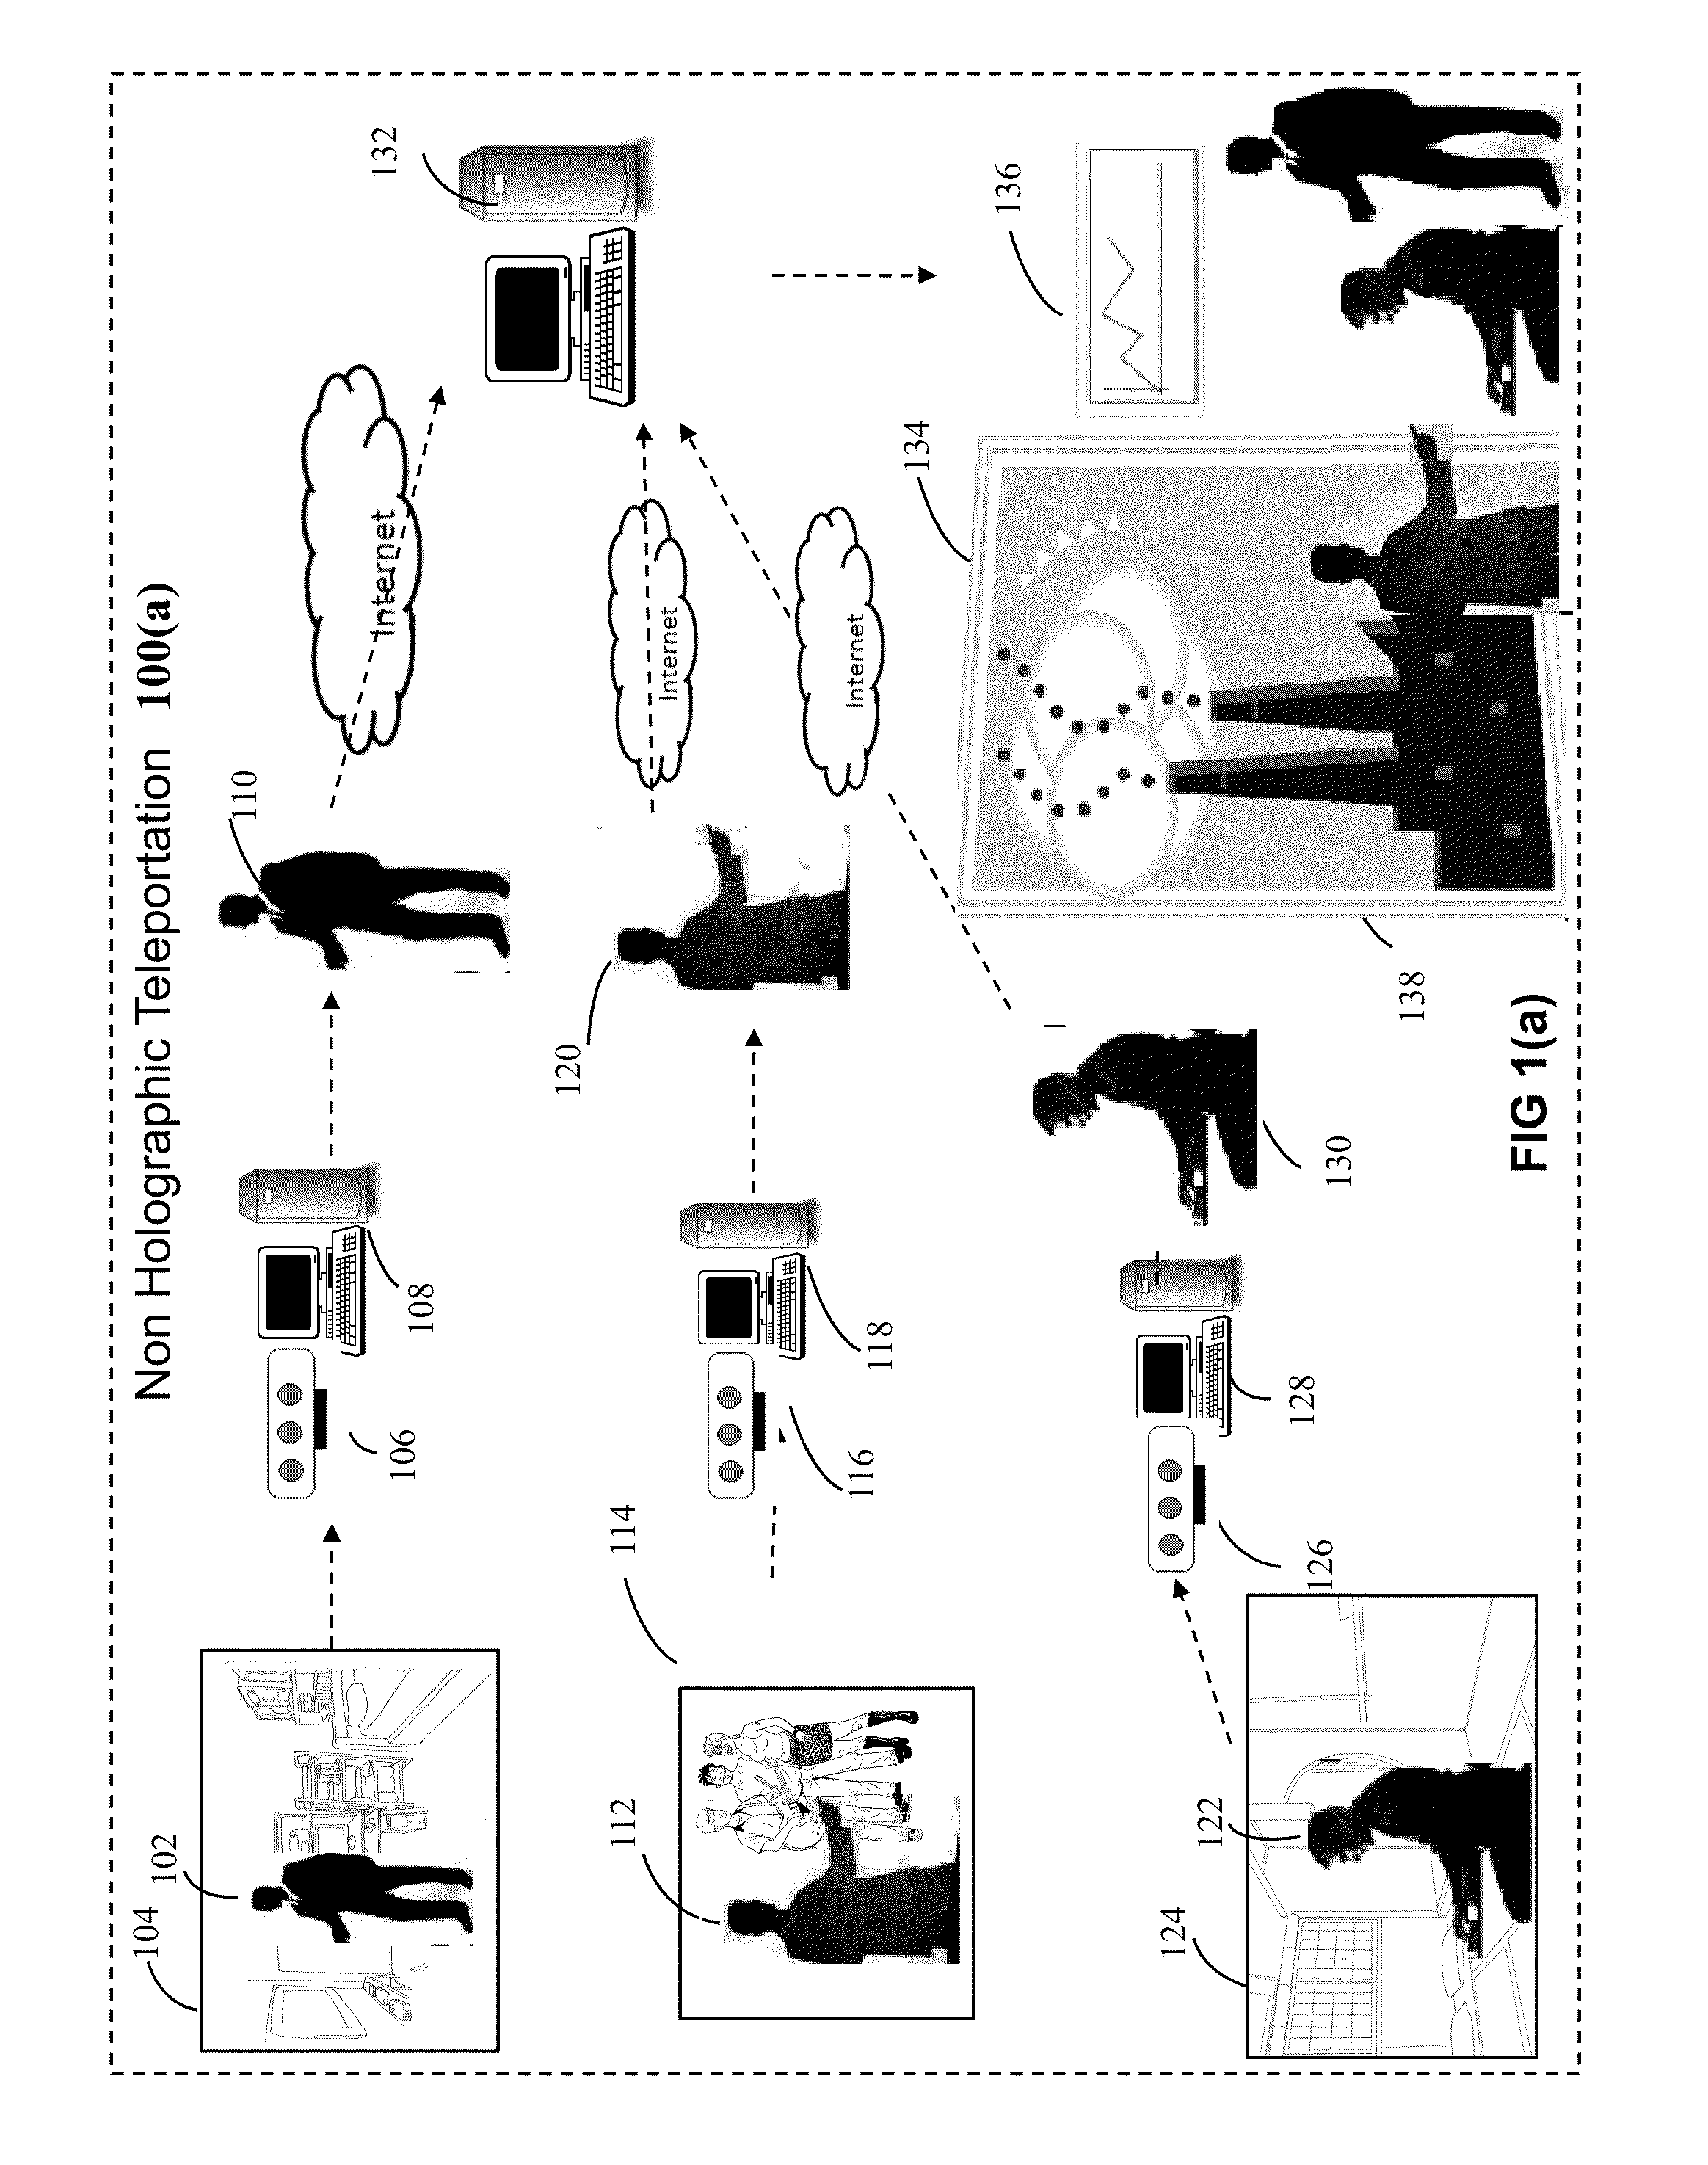 System and method for non-holographic teleportation